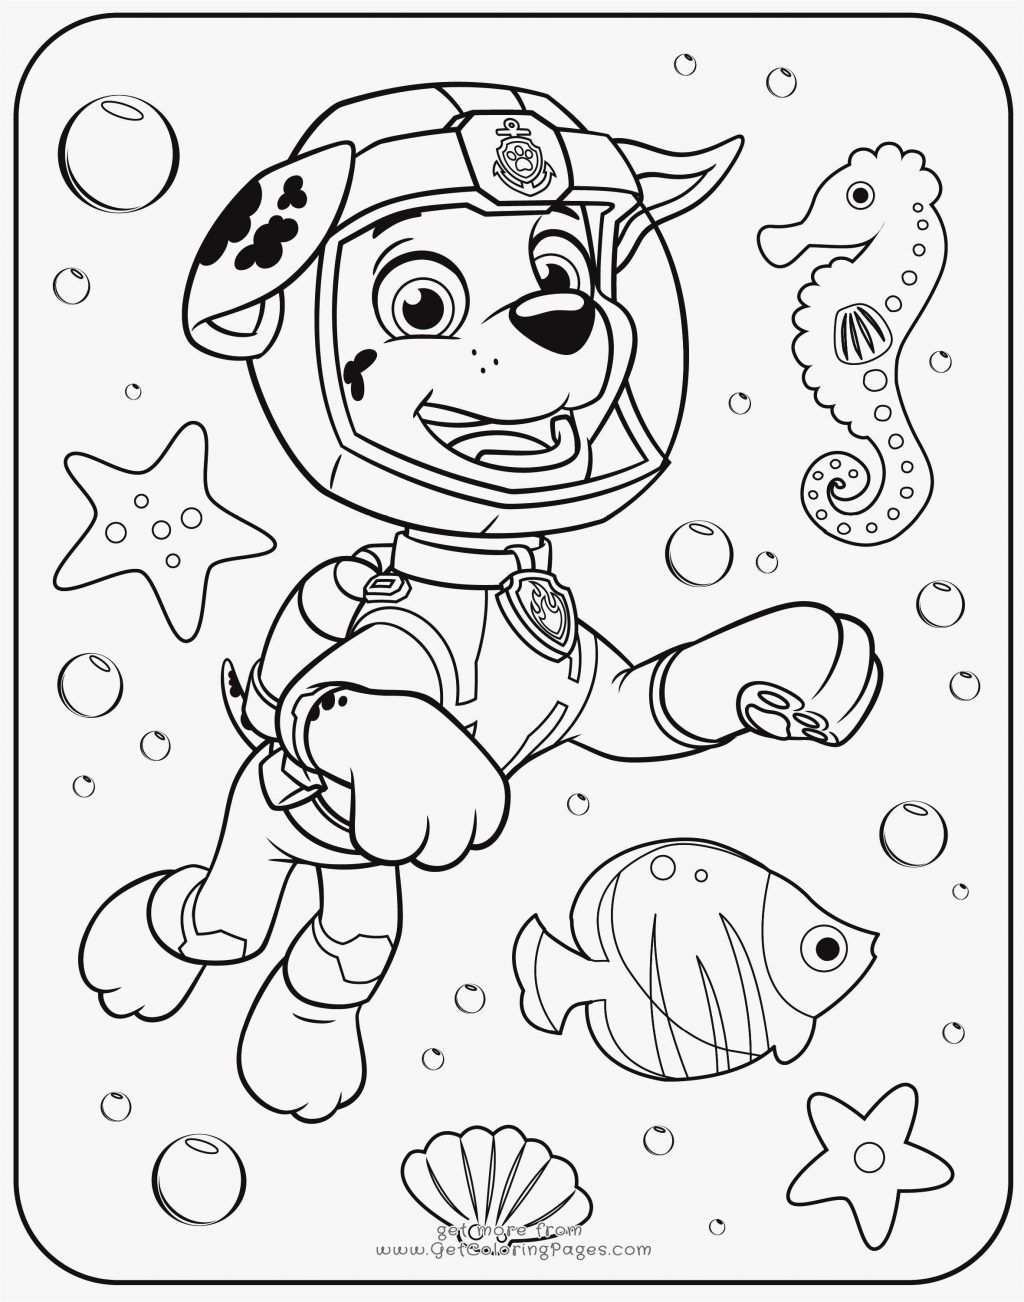 Grab Your Fresh Coloring Pages Paw Patrol Download Https Www Gethighit Com Fresh Colo